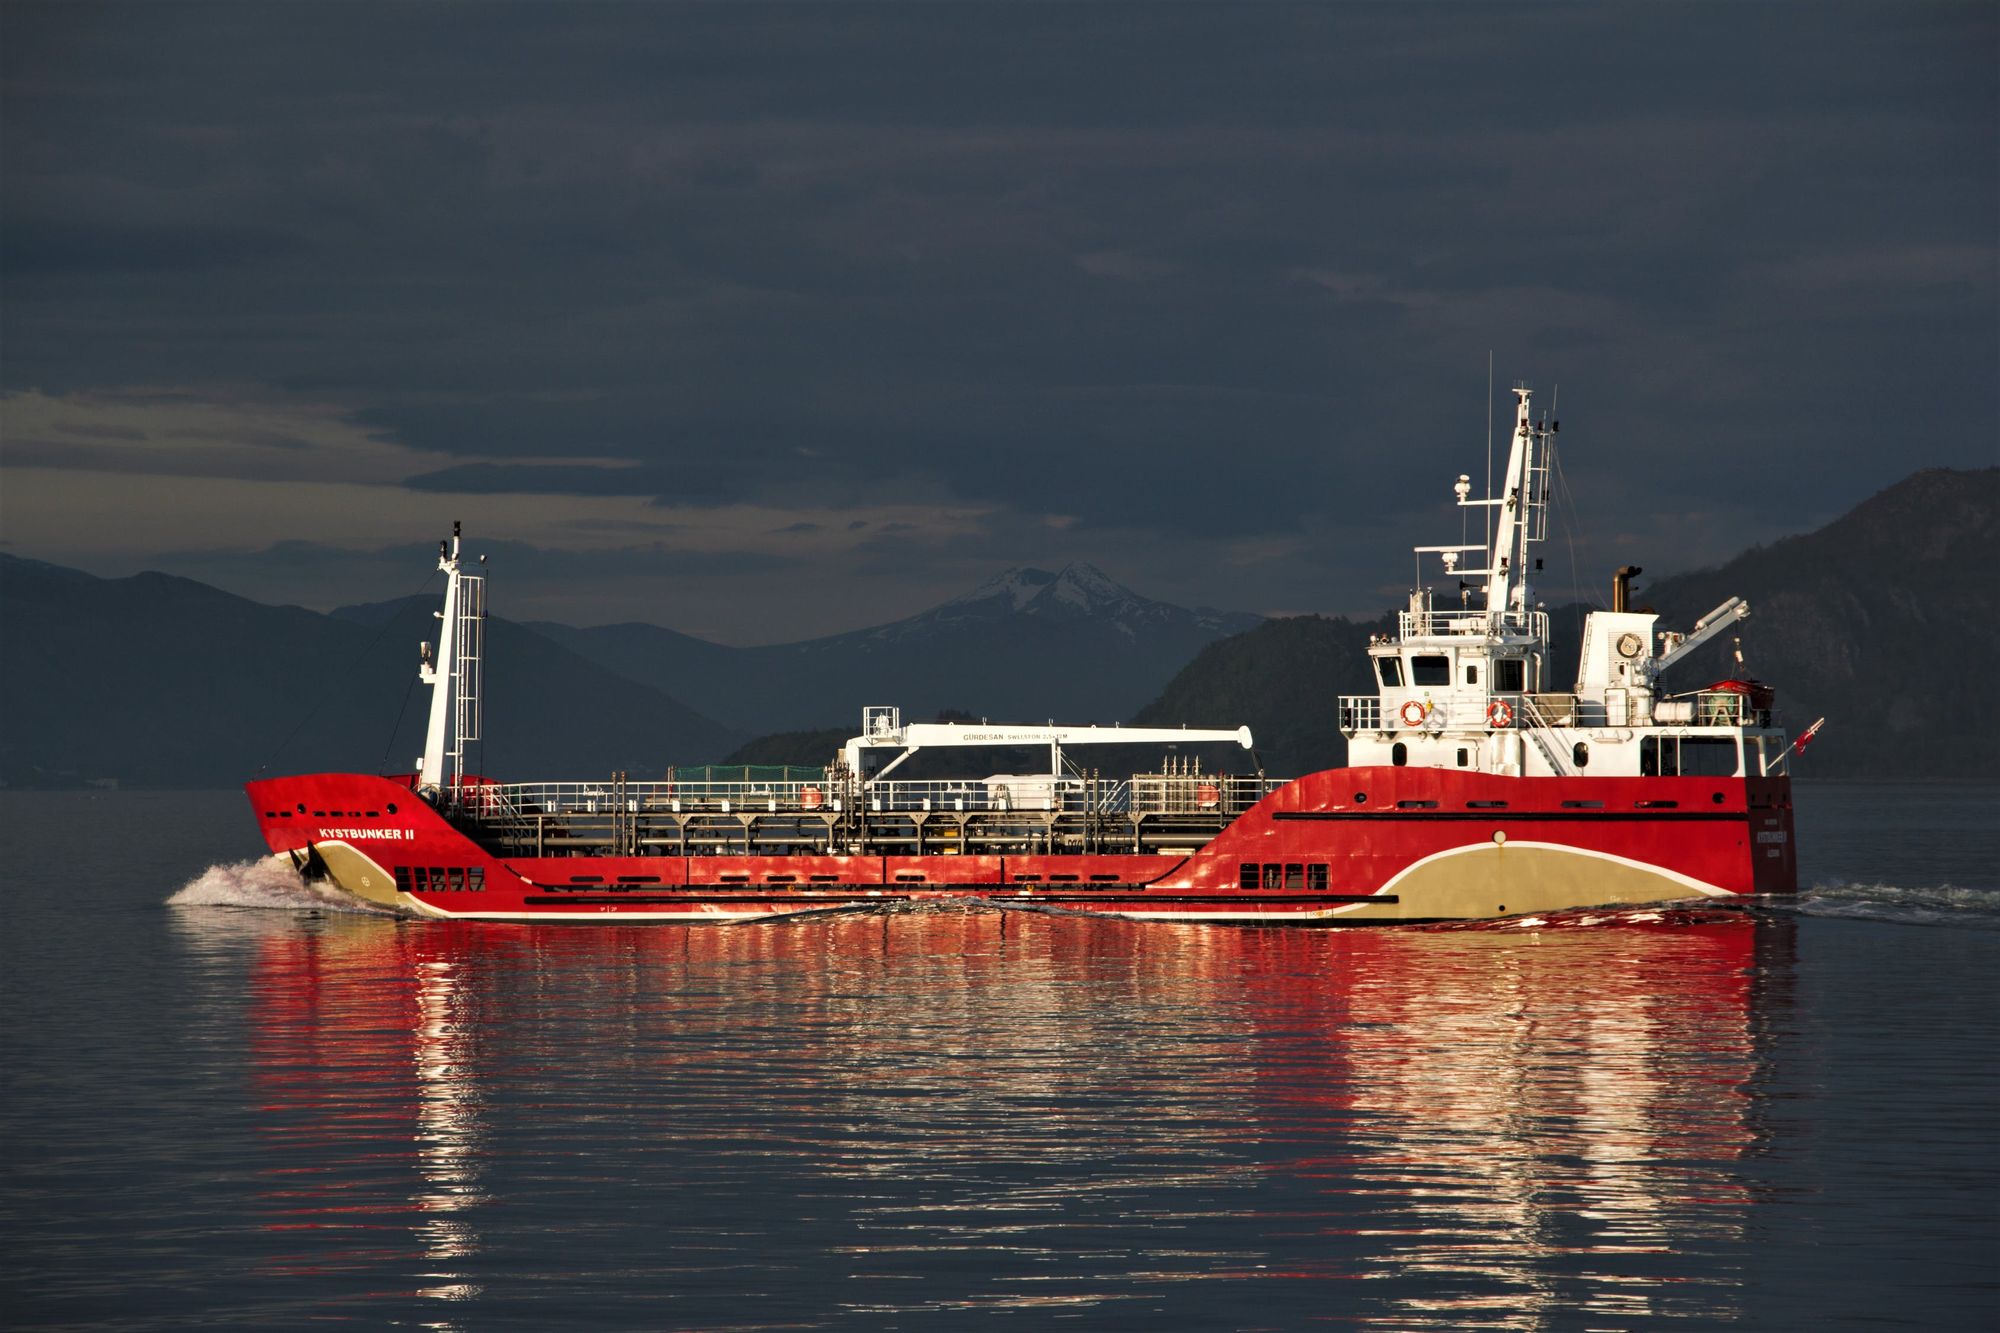 A red and white oil tanker under a grey sky